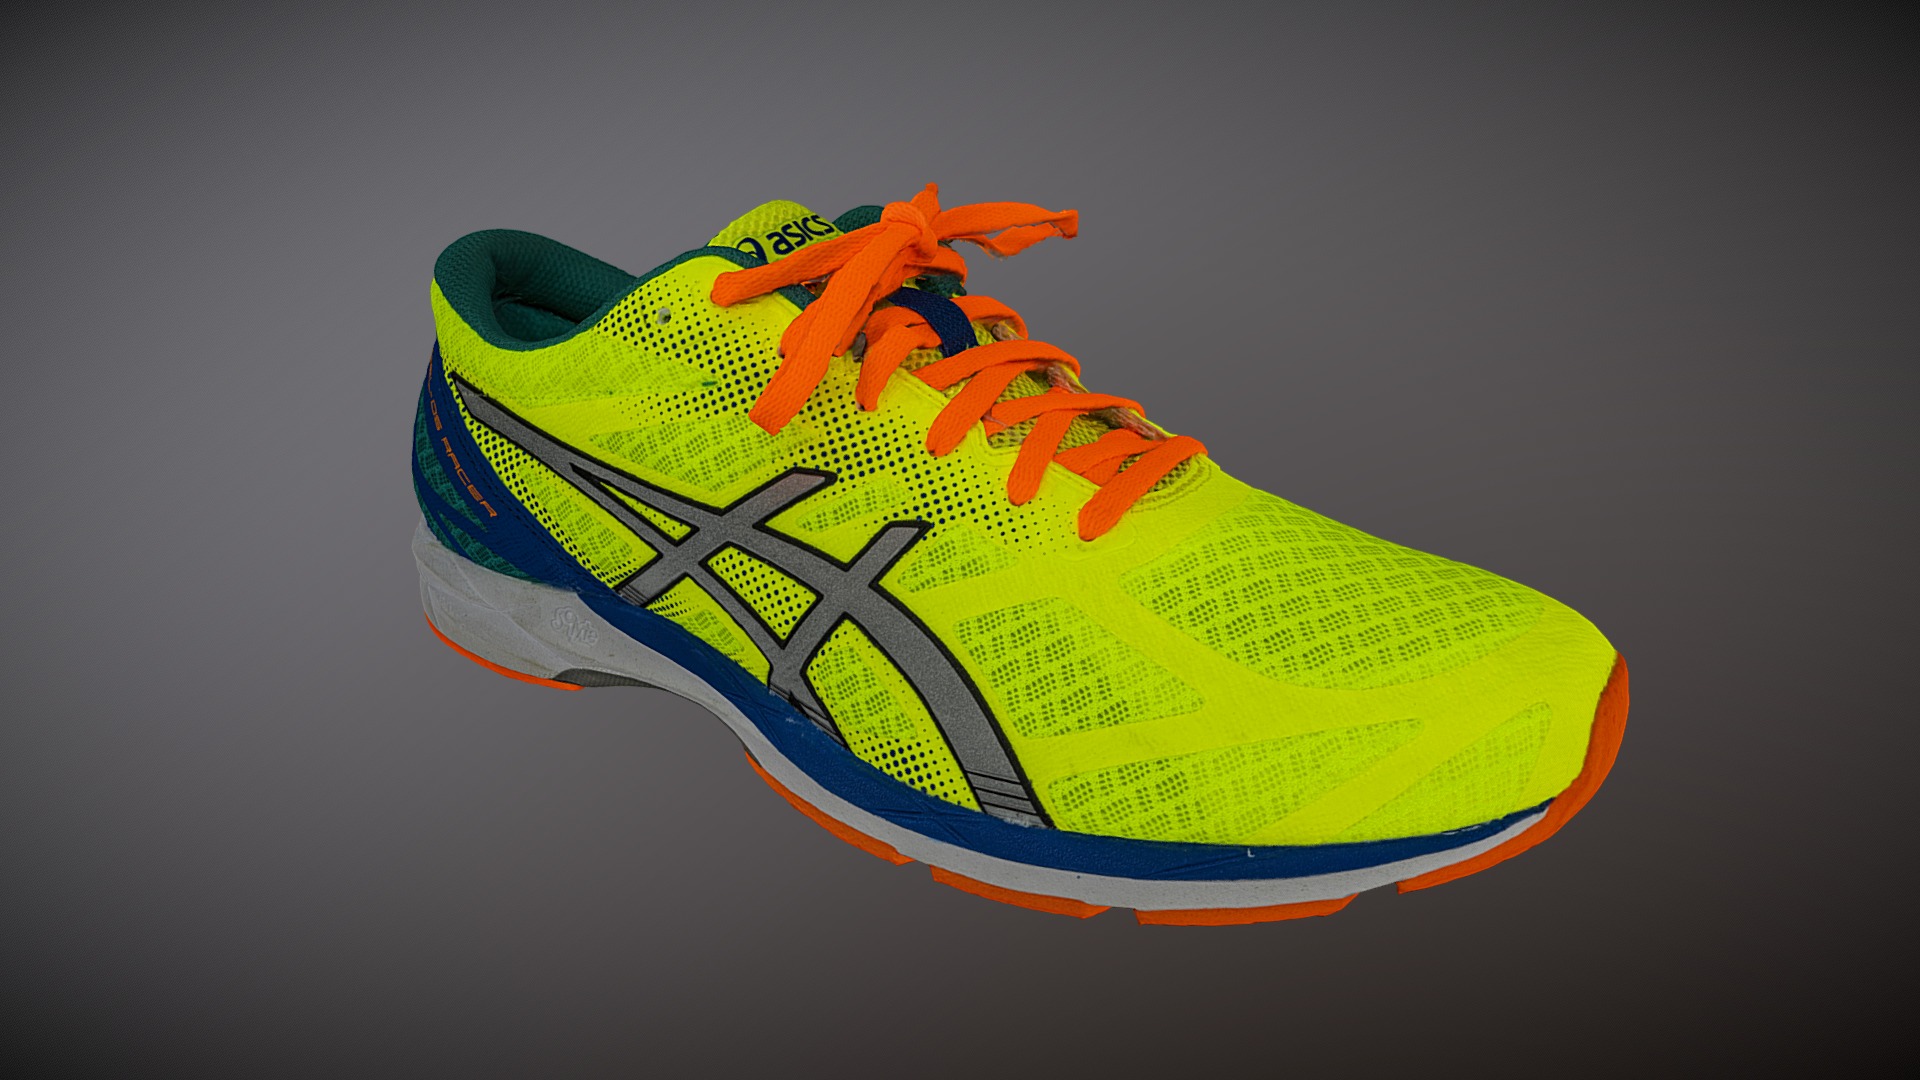 3D model Asics Gel DS Racer 10 photogrammetry scan - This is a 3D model of the Asics Gel DS Racer 10 photogrammetry scan. The 3D model is about a colorful shoe with a black sole.